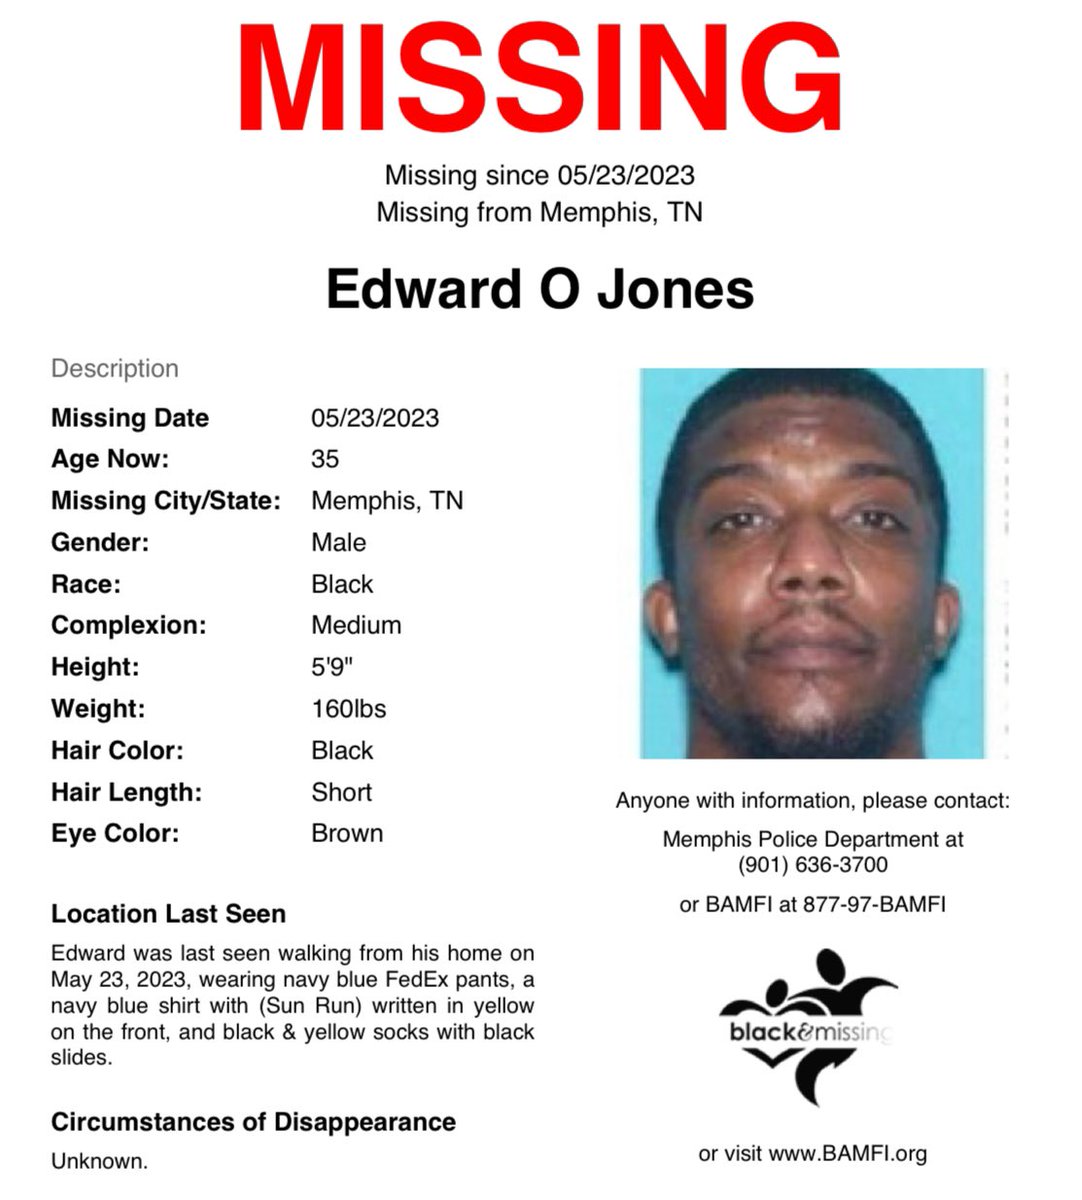 Today marks the 1-year anniversary of now-35-year-old, #EdwardJones, out of Memphis, TN.   

He was last seen walking from his home on May 23, 2023, wearing navy blue FedEx plants, a navy blue shirt & yellow socks w/ black slides.

Pls share his story to #HelpUsFindEdwardJones